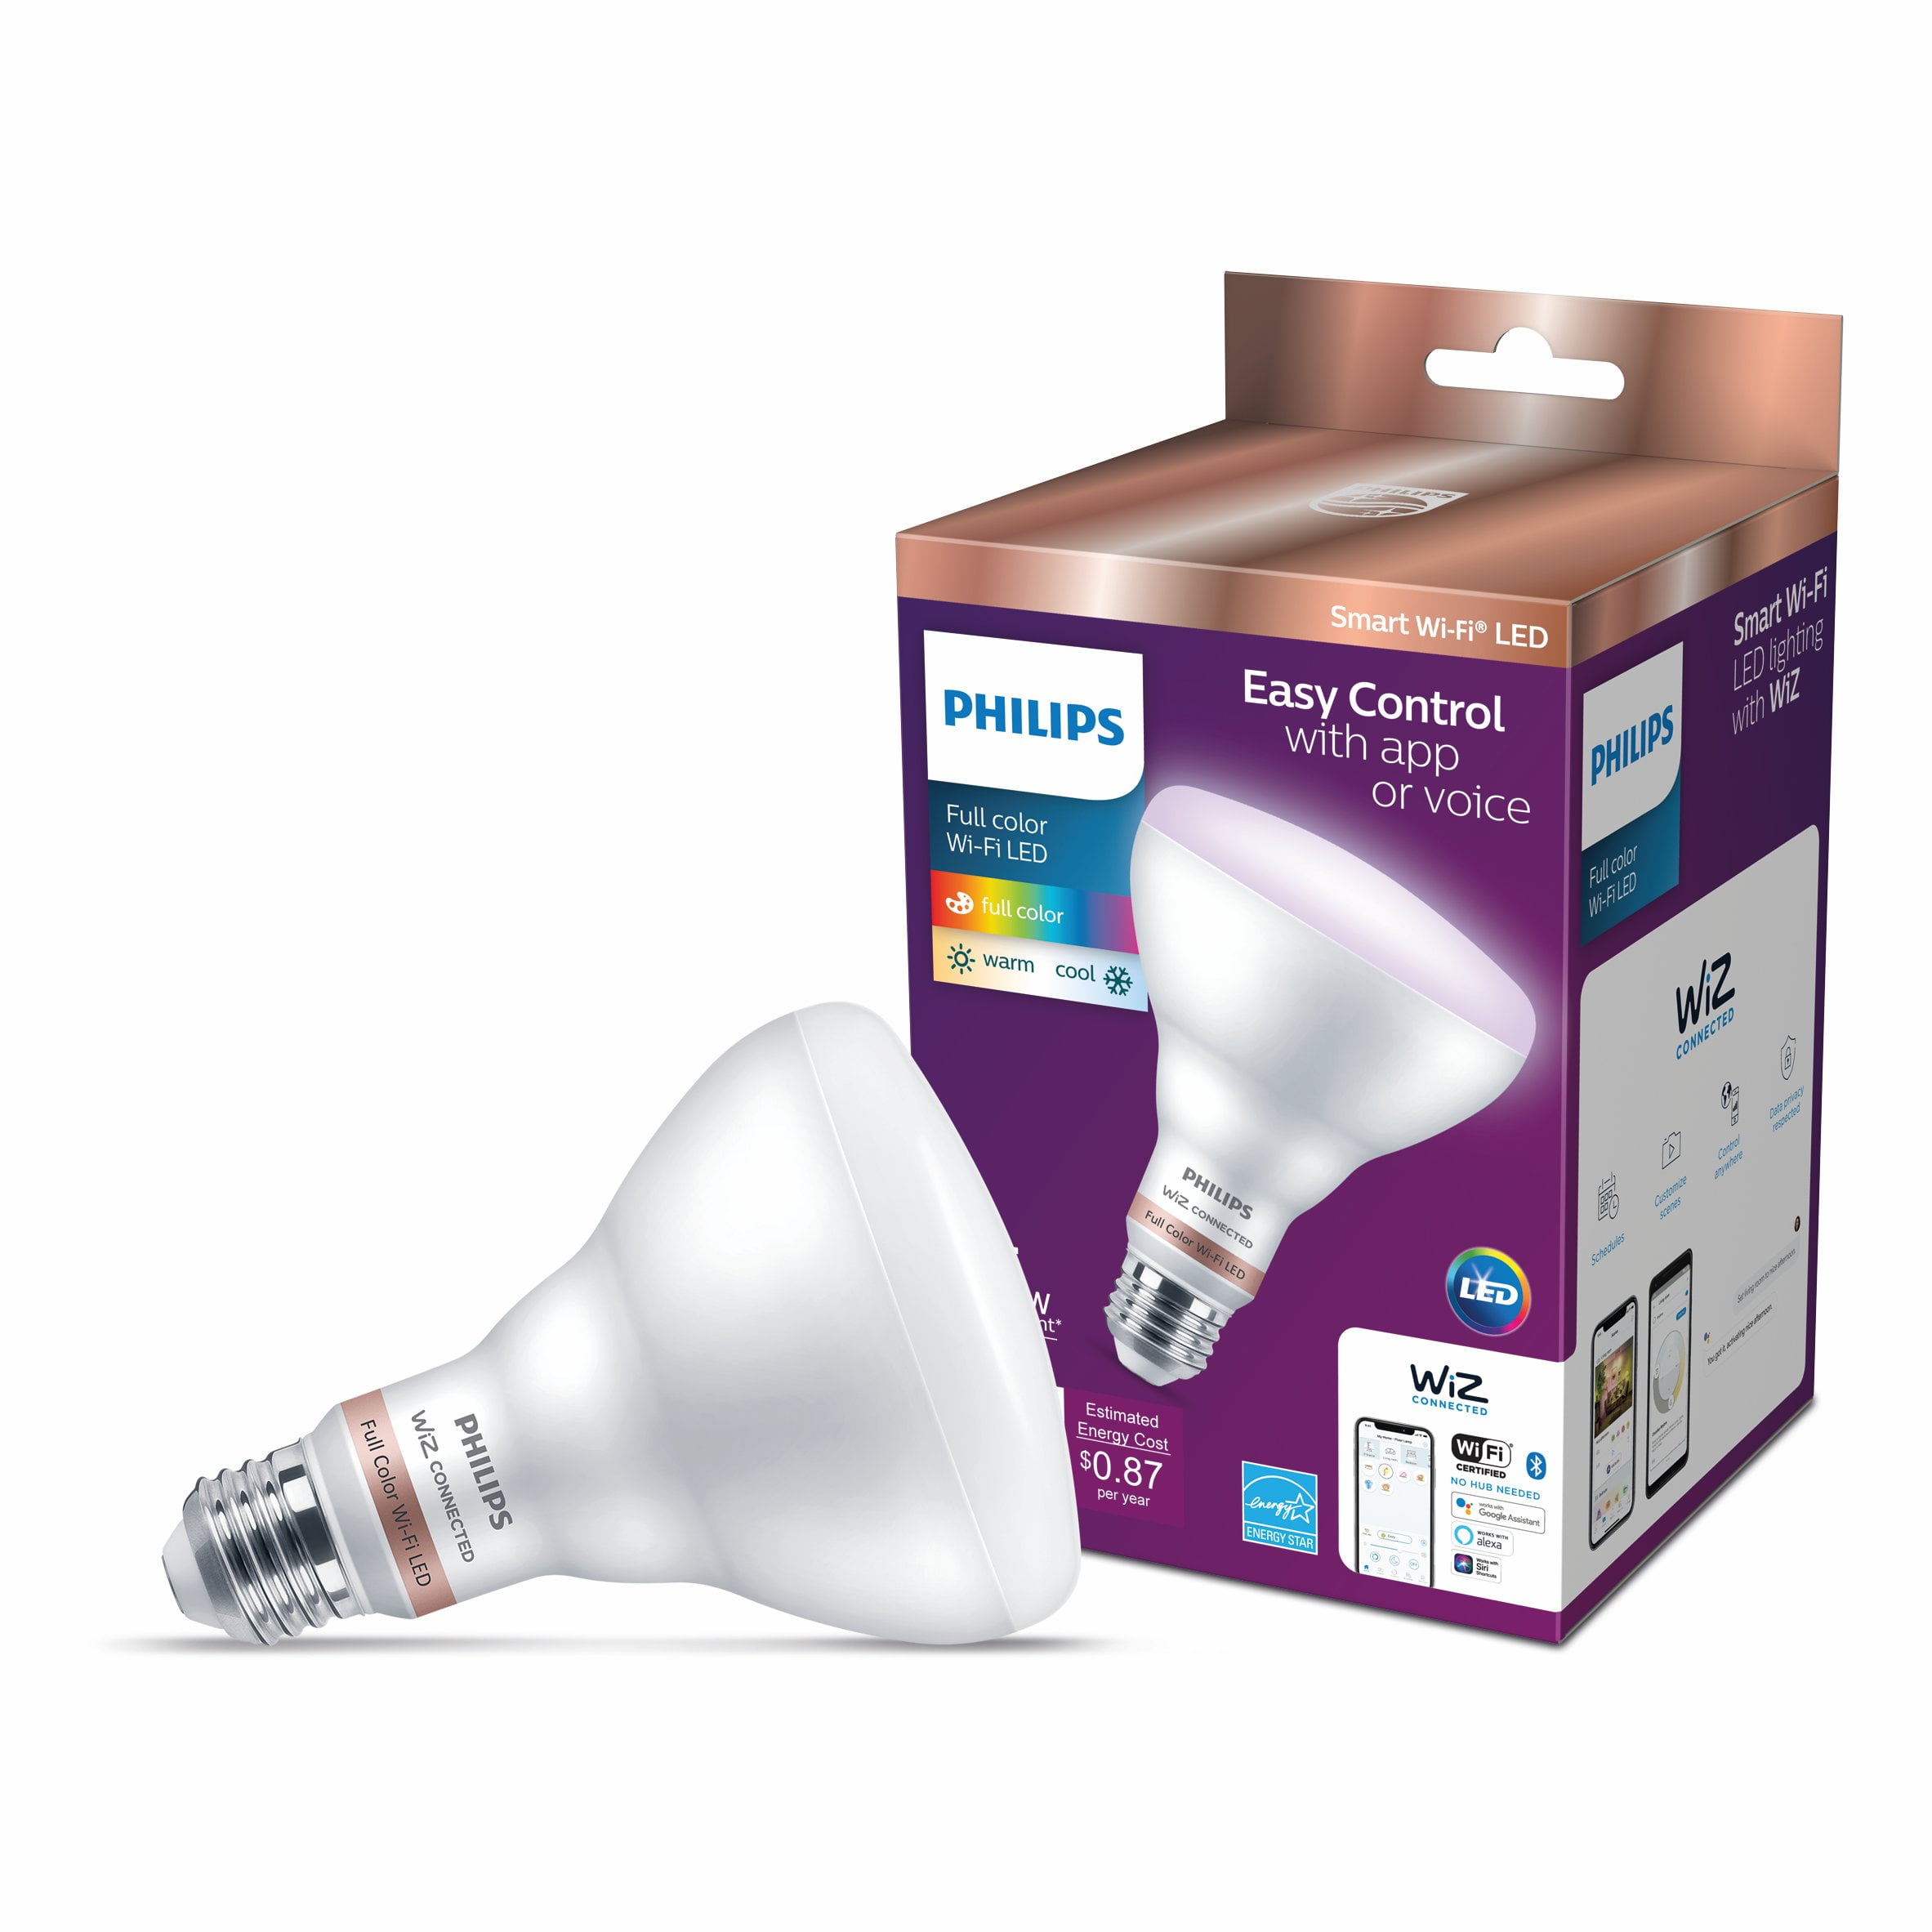 Philips LED Light Bulb Soft White Br30 Dimmable Smart Wifi Connected Wireless 